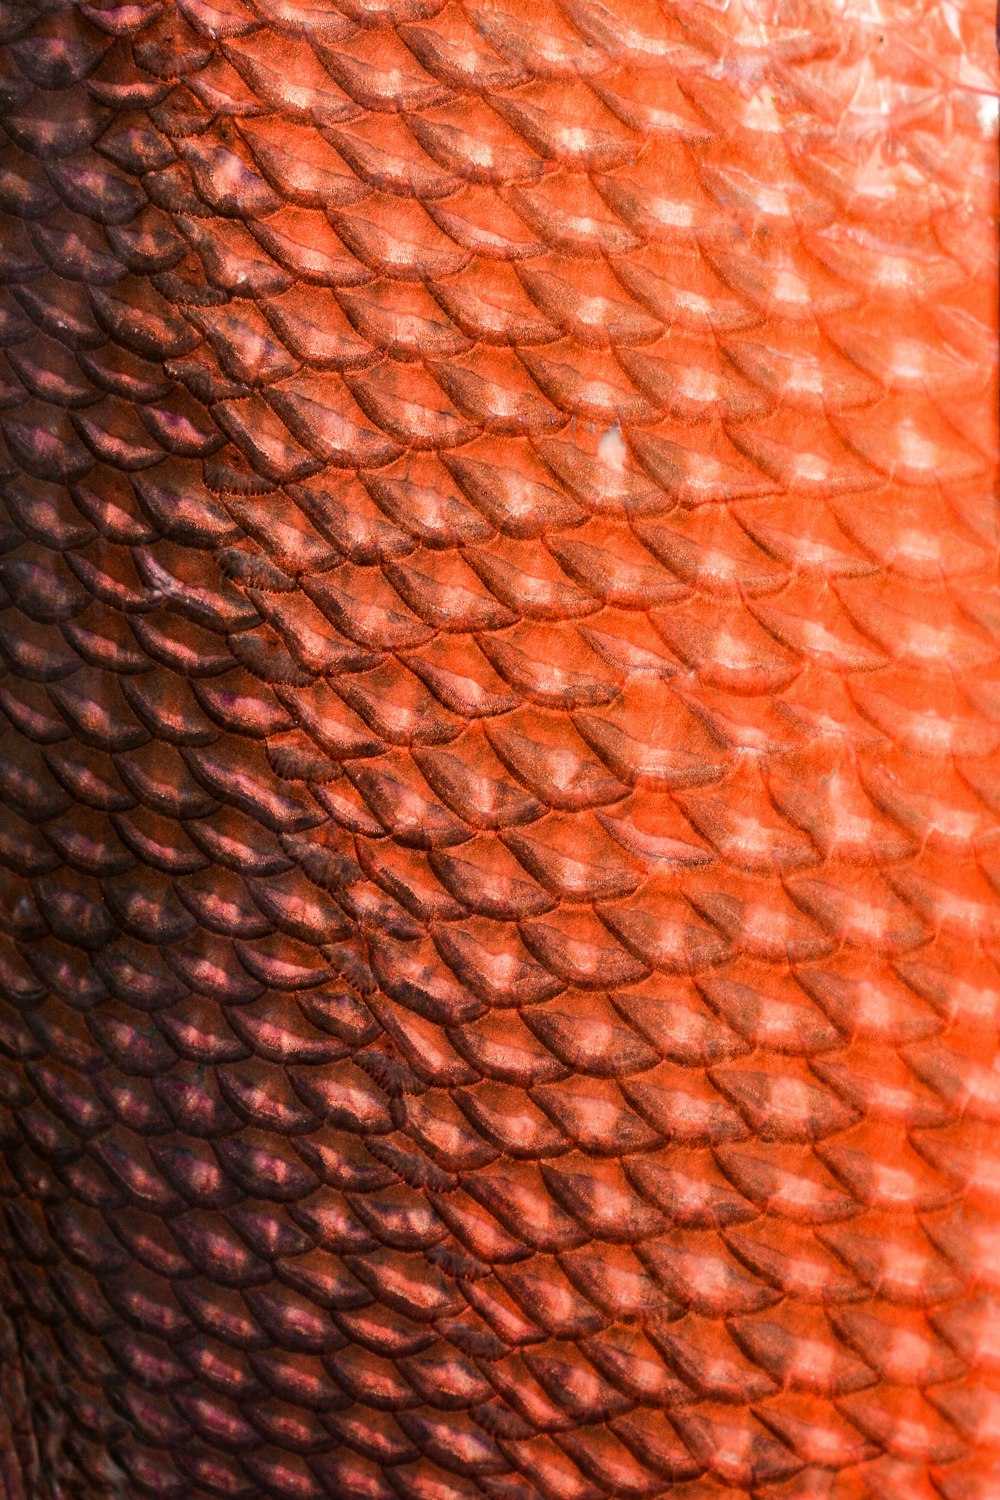 brown and white textile in close up image